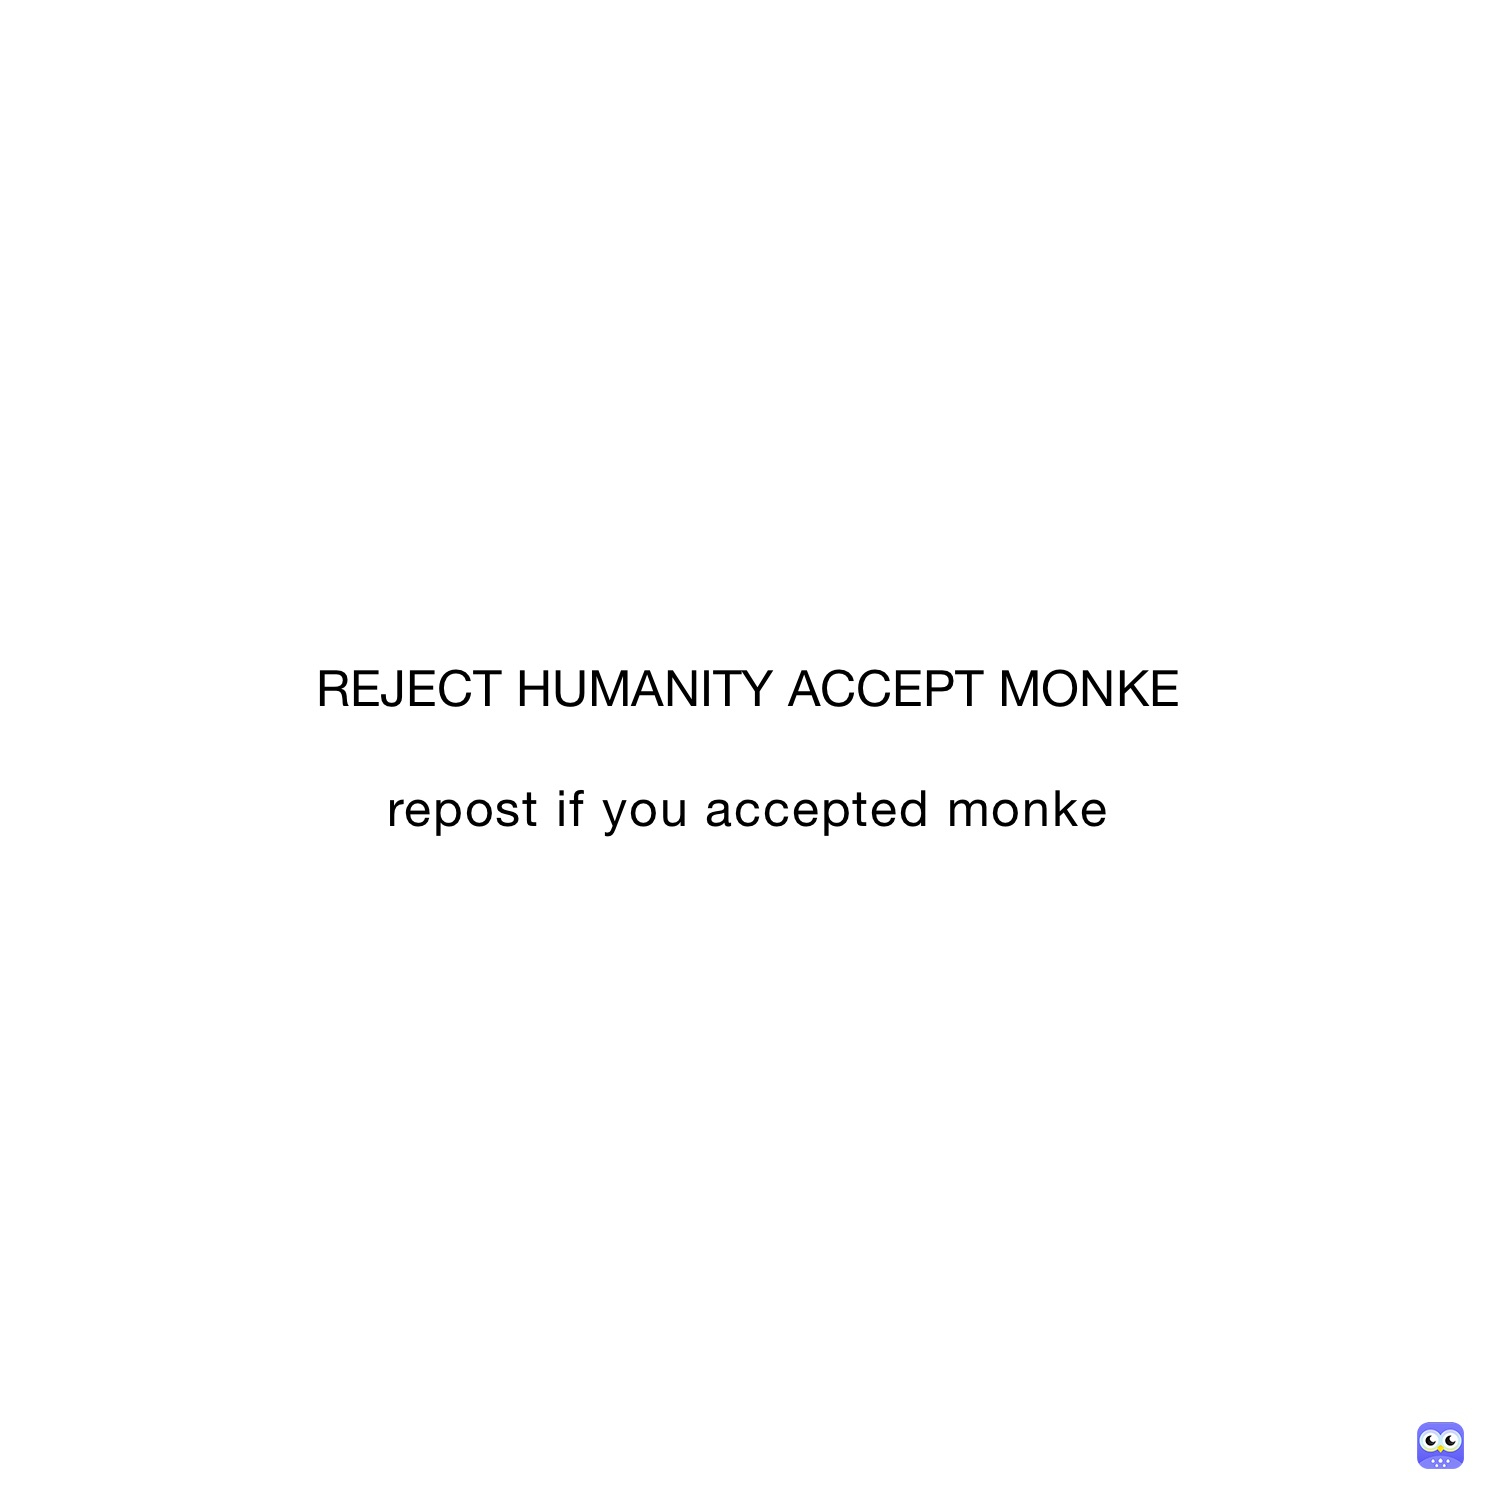 REJECT HUMANITY ACCEPT MONKE

repost if you accepted monke